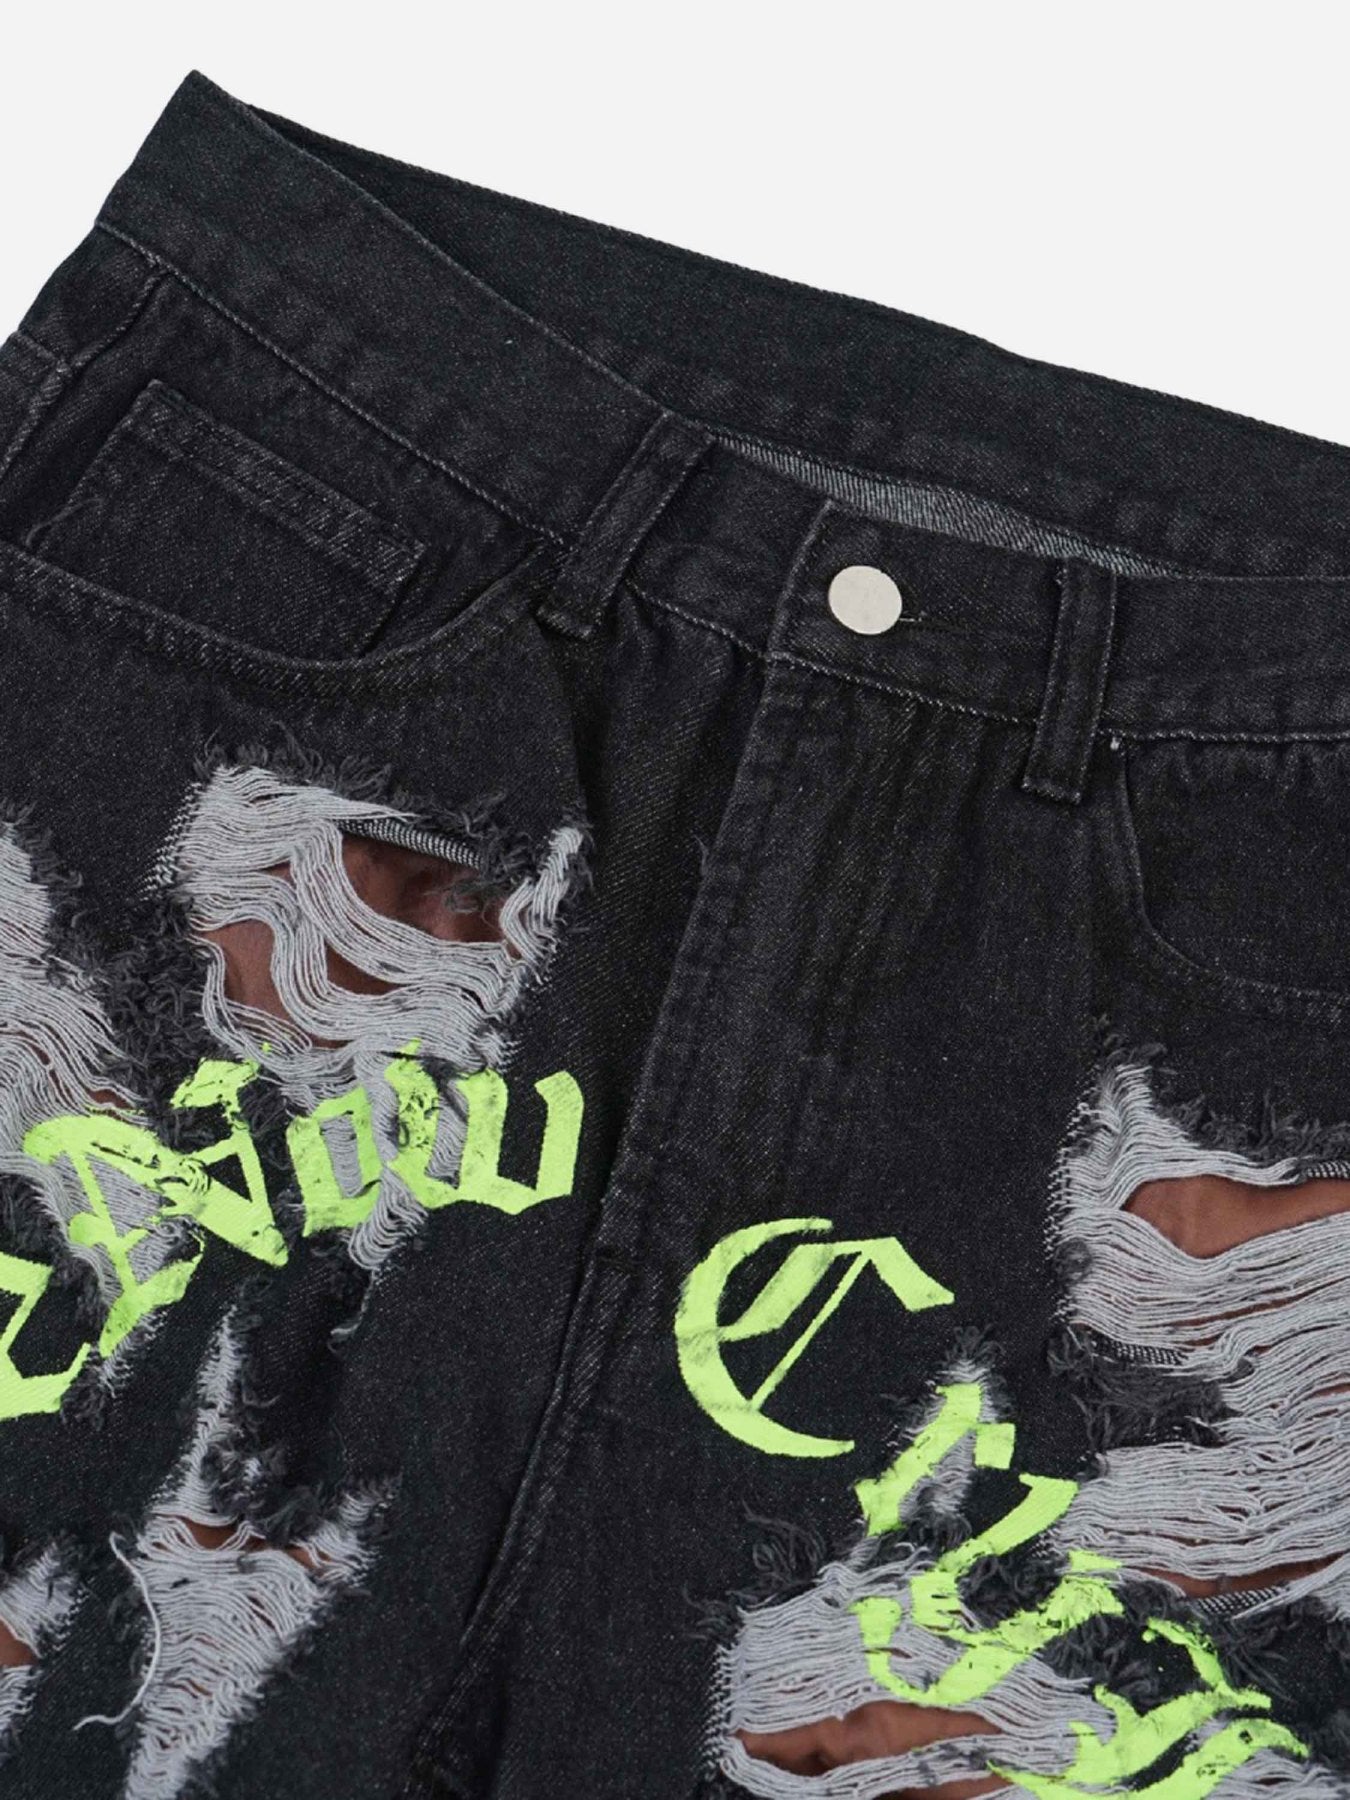 The Supermade Punk Design Ripped Water Wash Jeans -1553